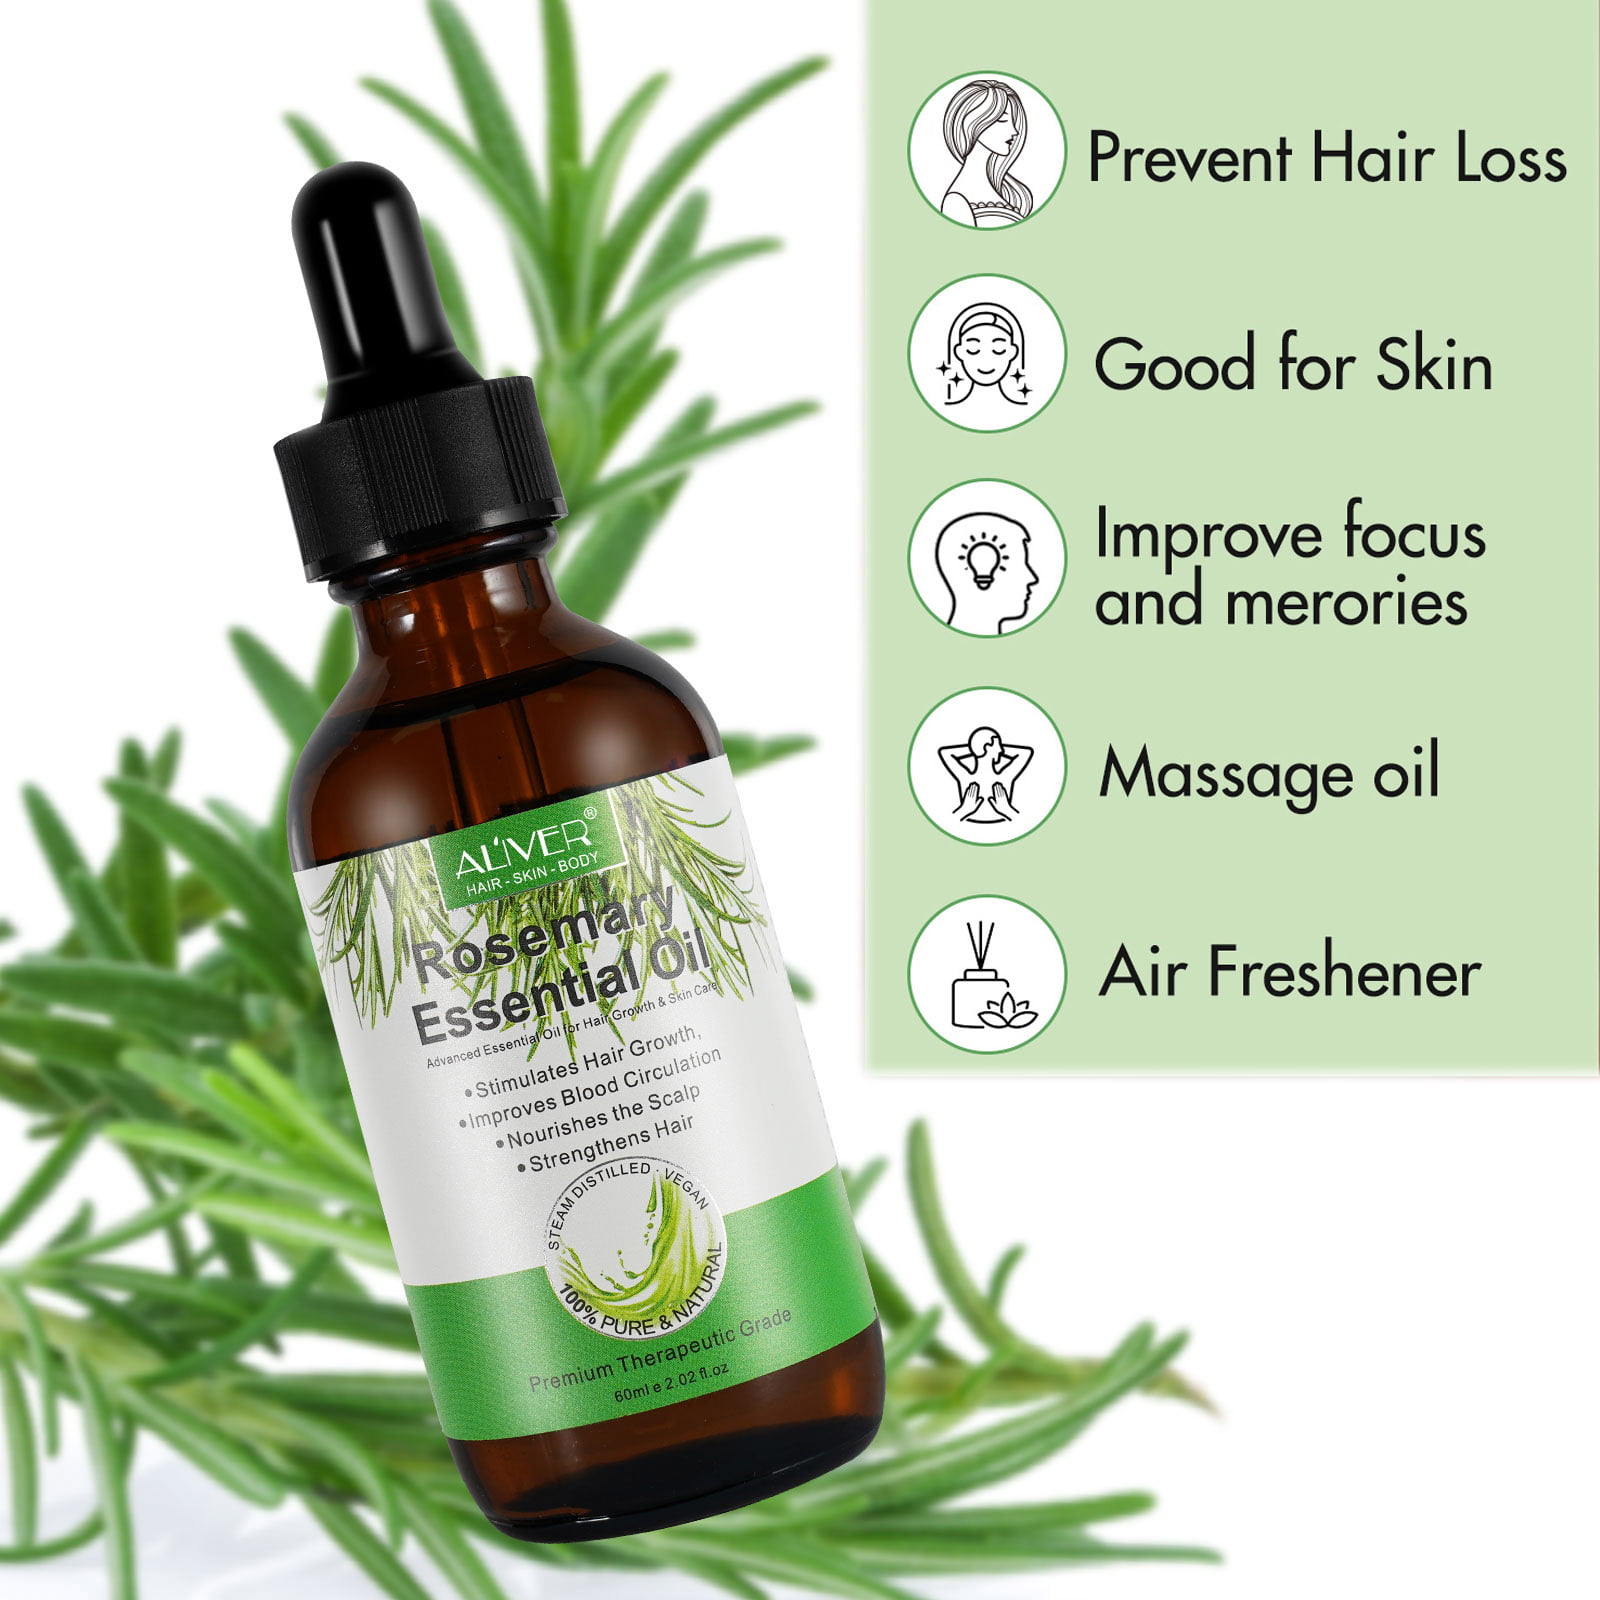 Details more than 153 rosemary essential oil for hair latest